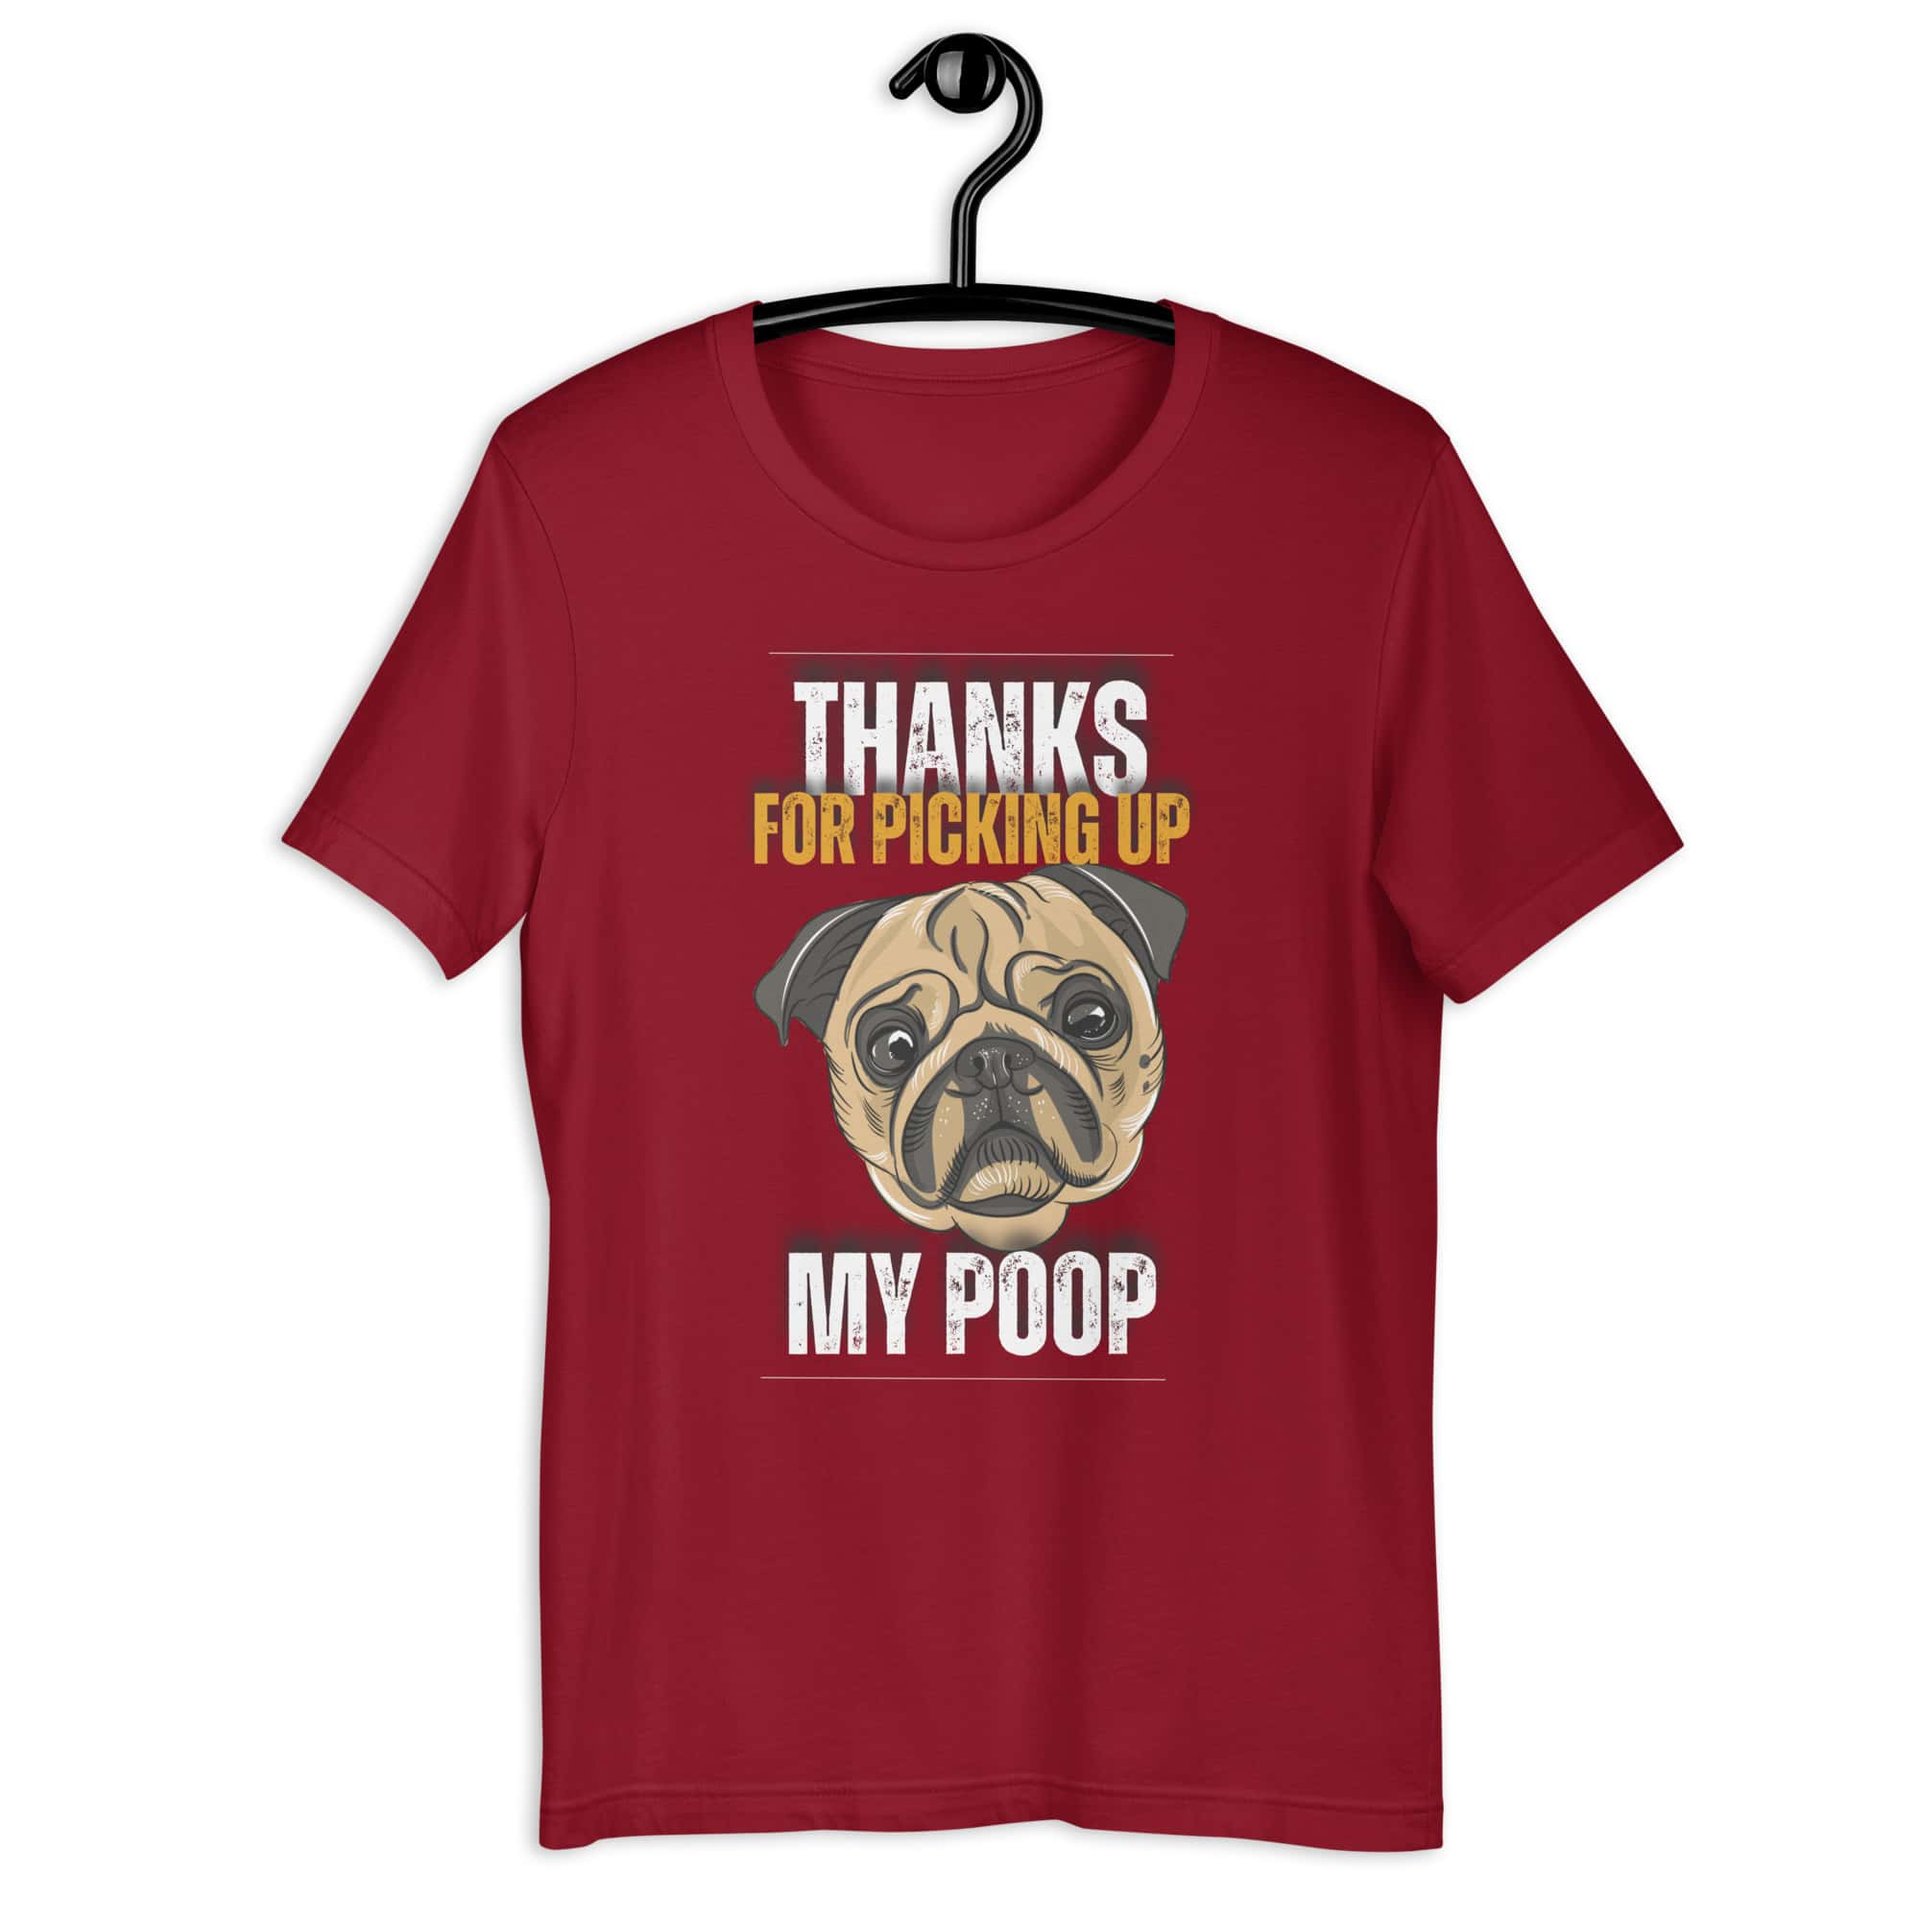 Thanks For Picking Up My POOP Funny Bulldog Unisex T-Shir. Cardinal